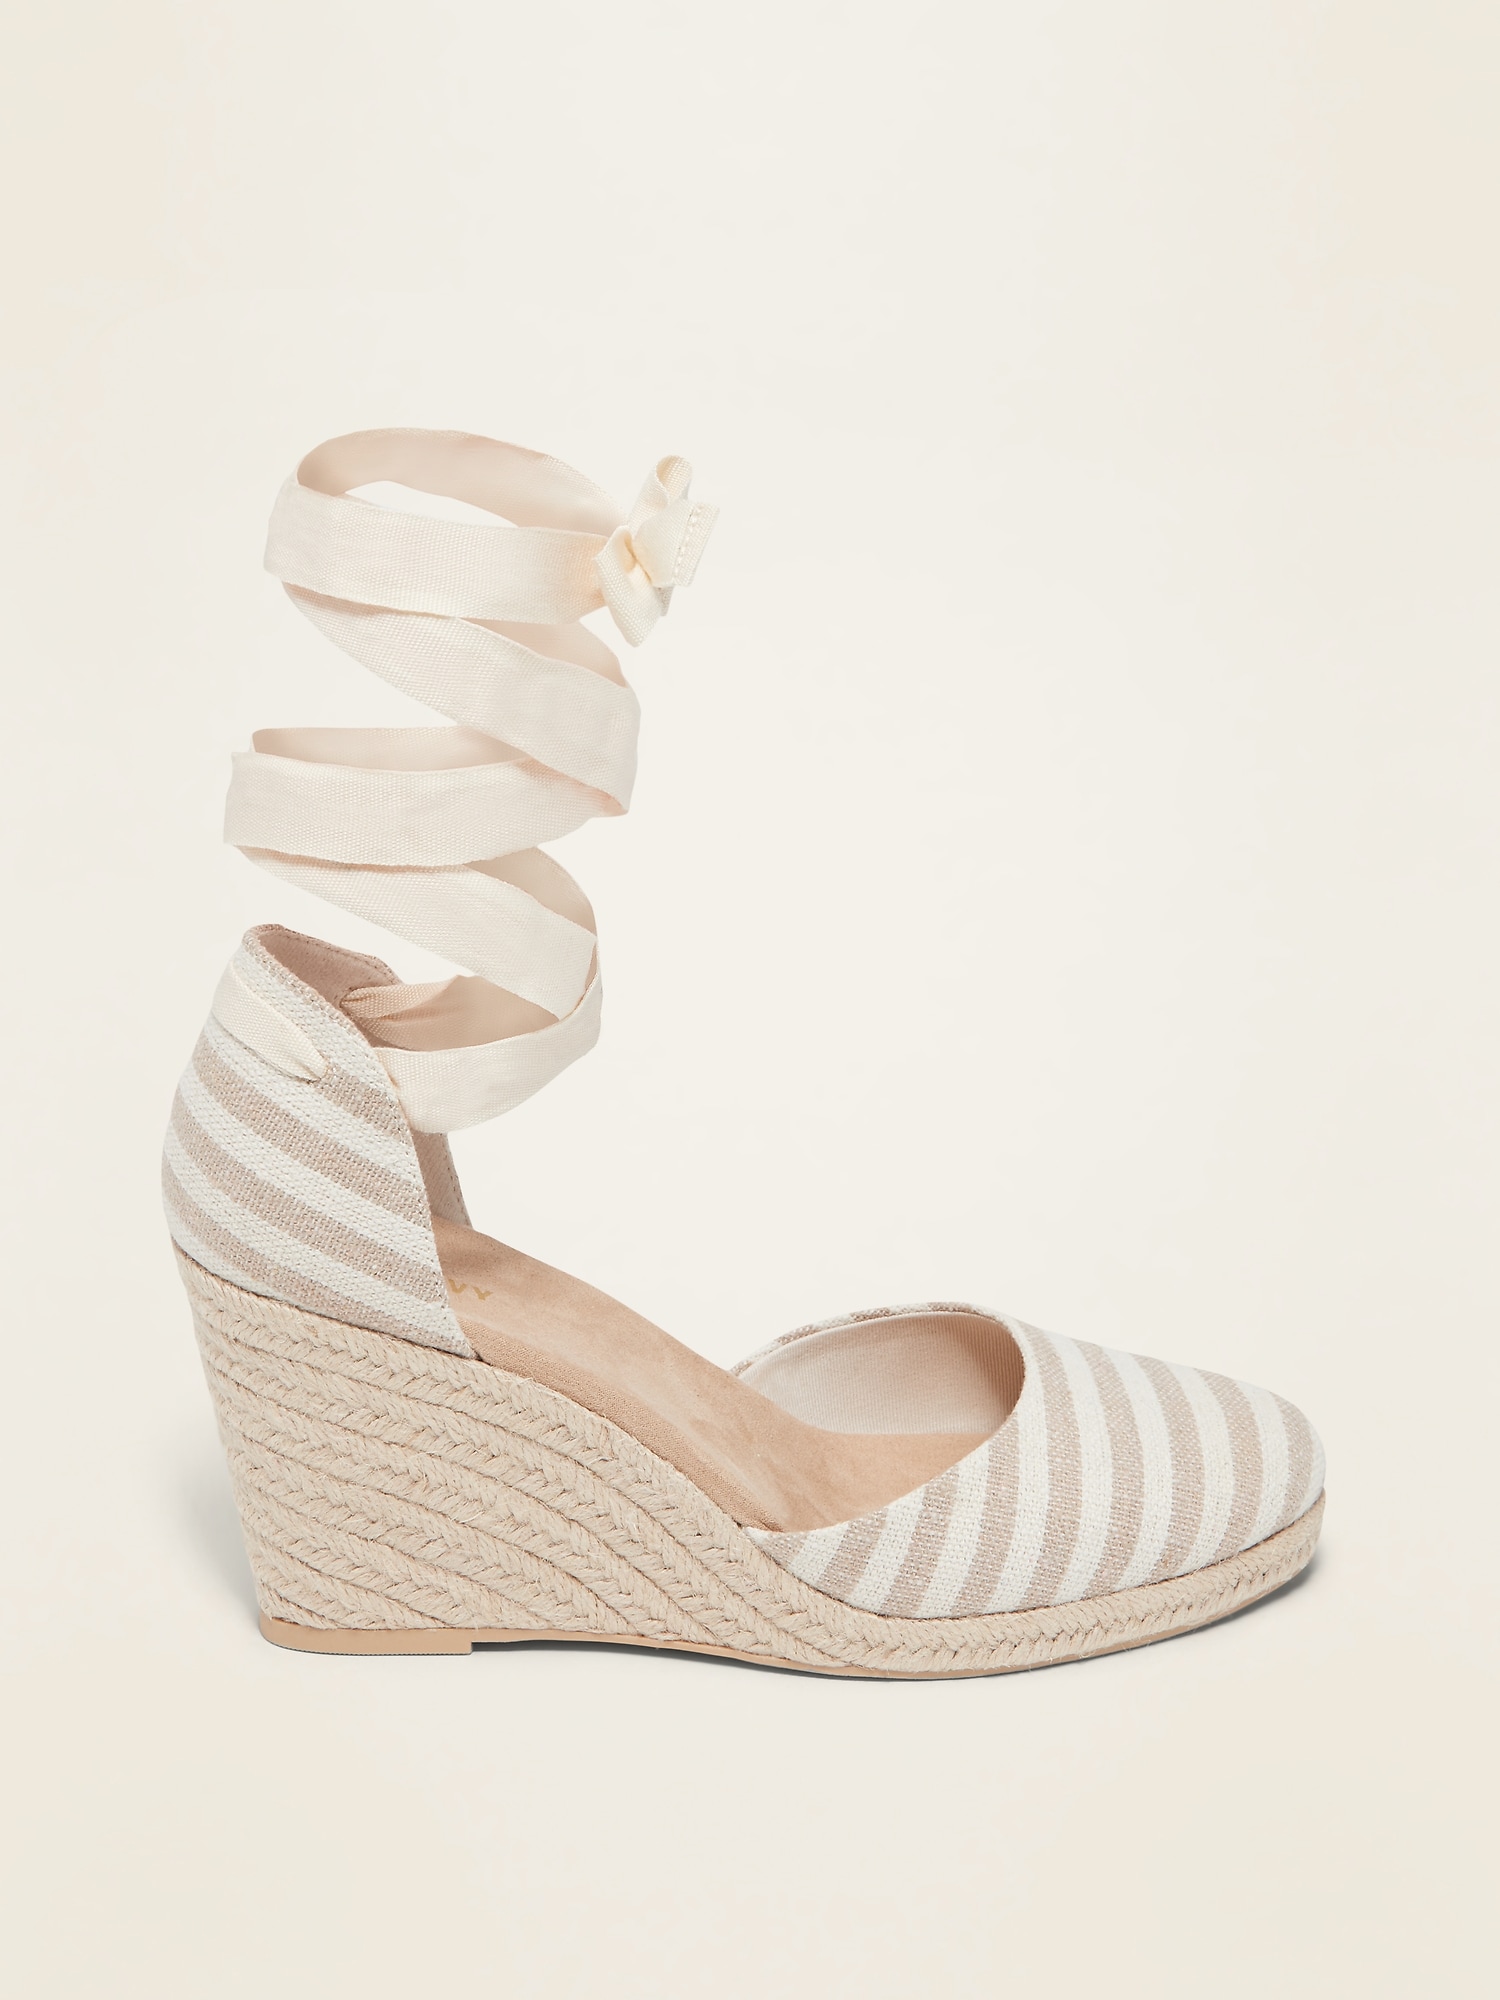 old navy lace up espadrilles